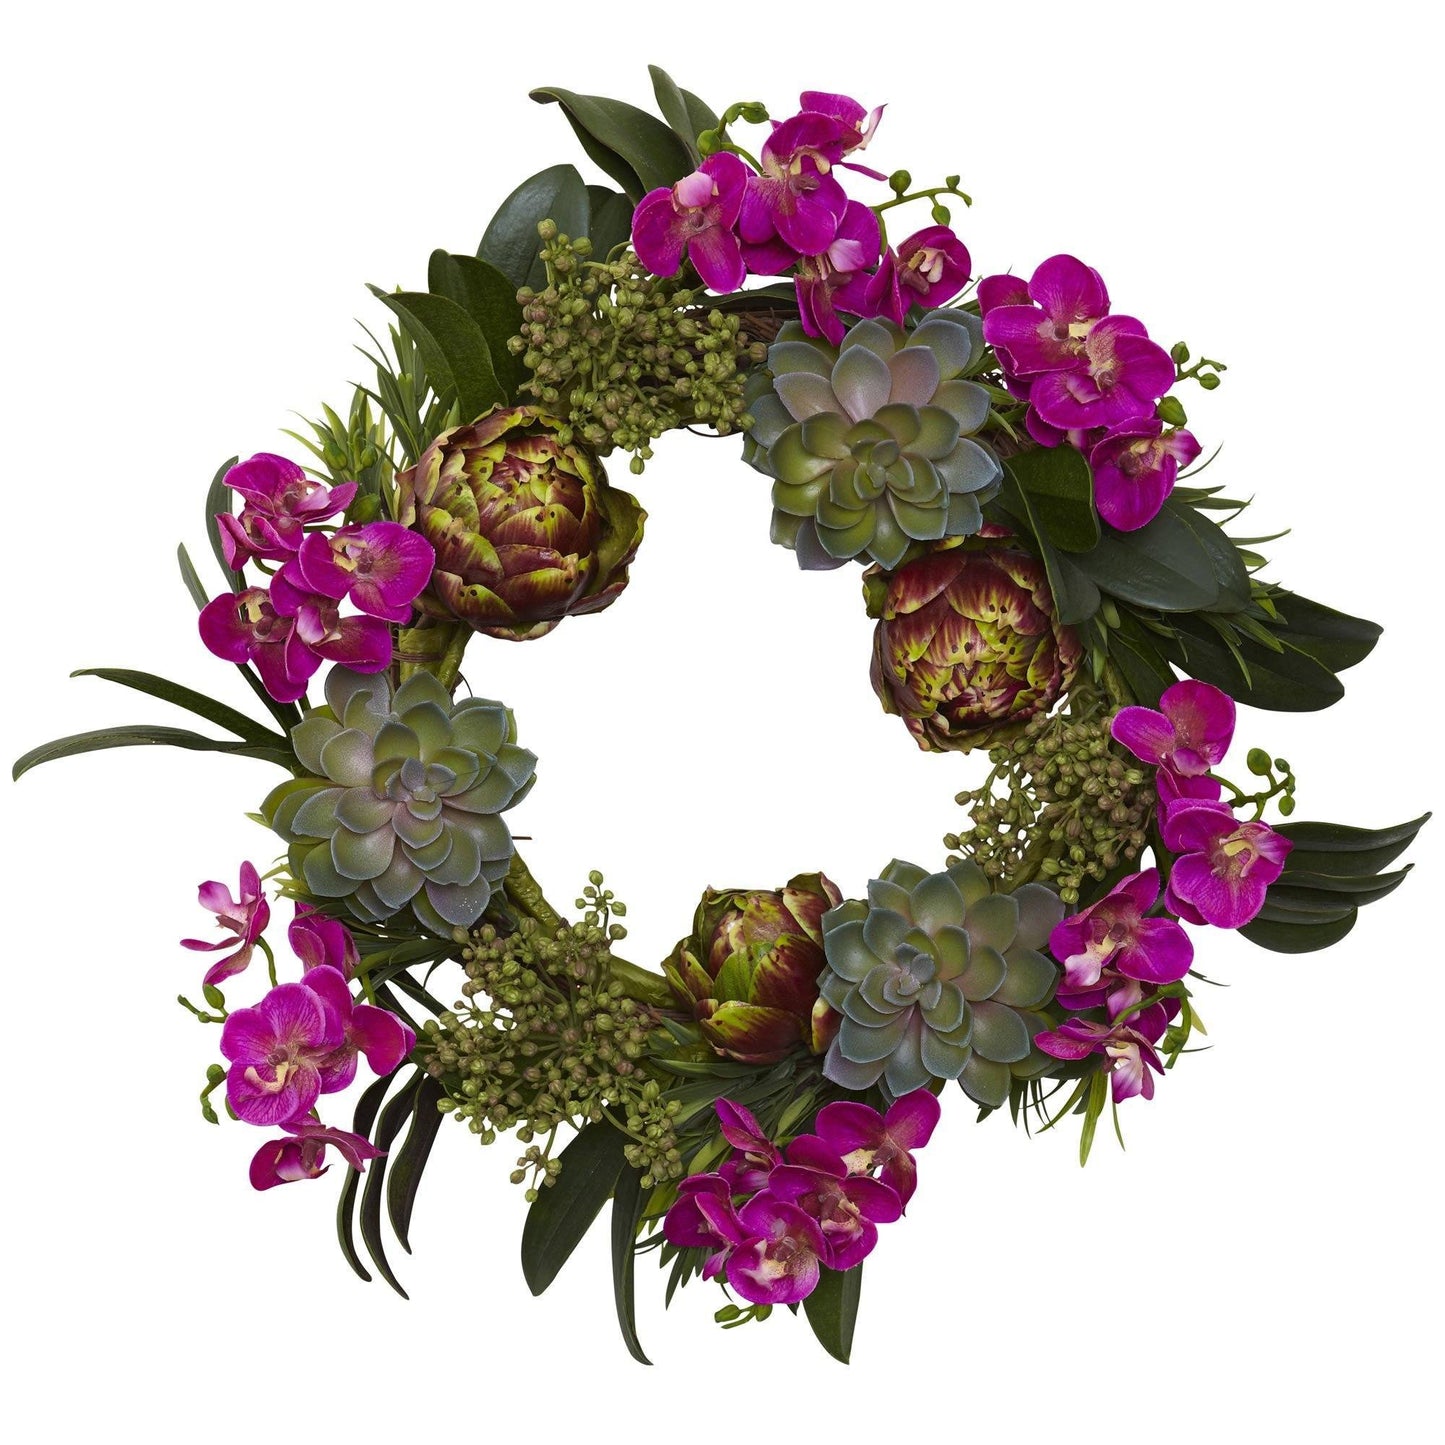 20” Orchid, Artichoke & Succulent Wreath by Nearly Natural